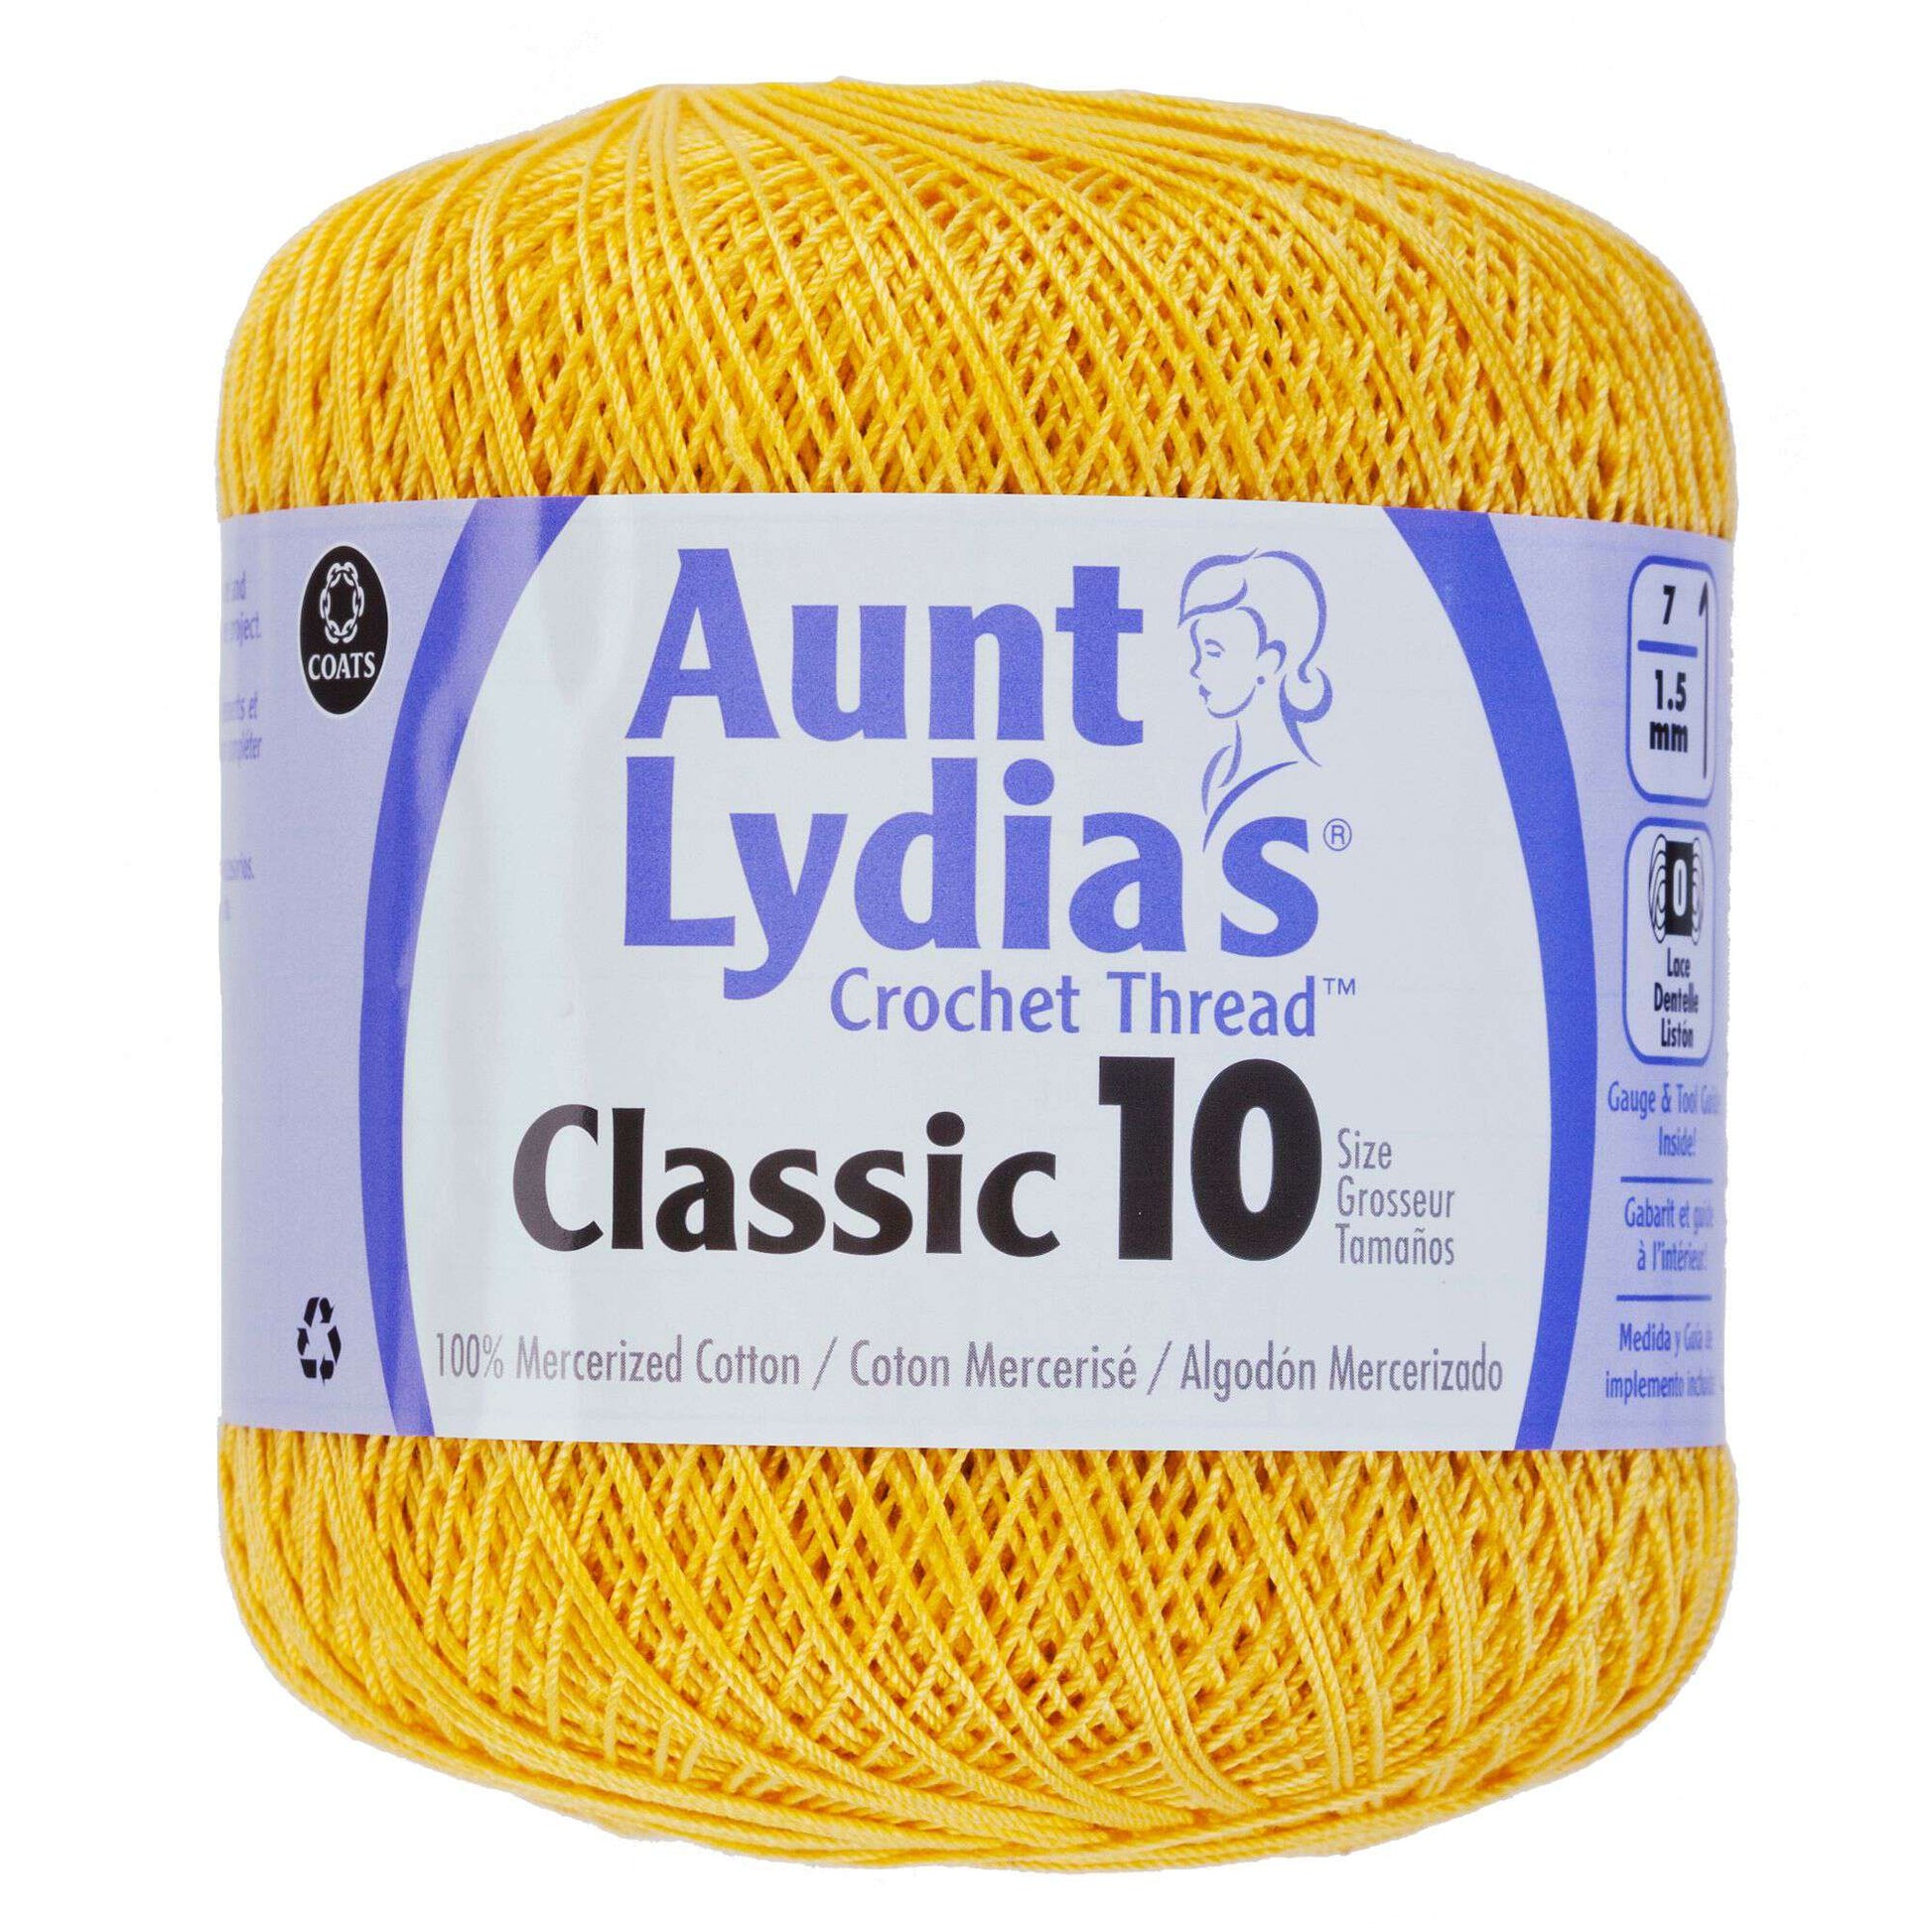 Aunt Lydia's Classic Crochet Thread Size 10 - Clearance shades Golden Yellow